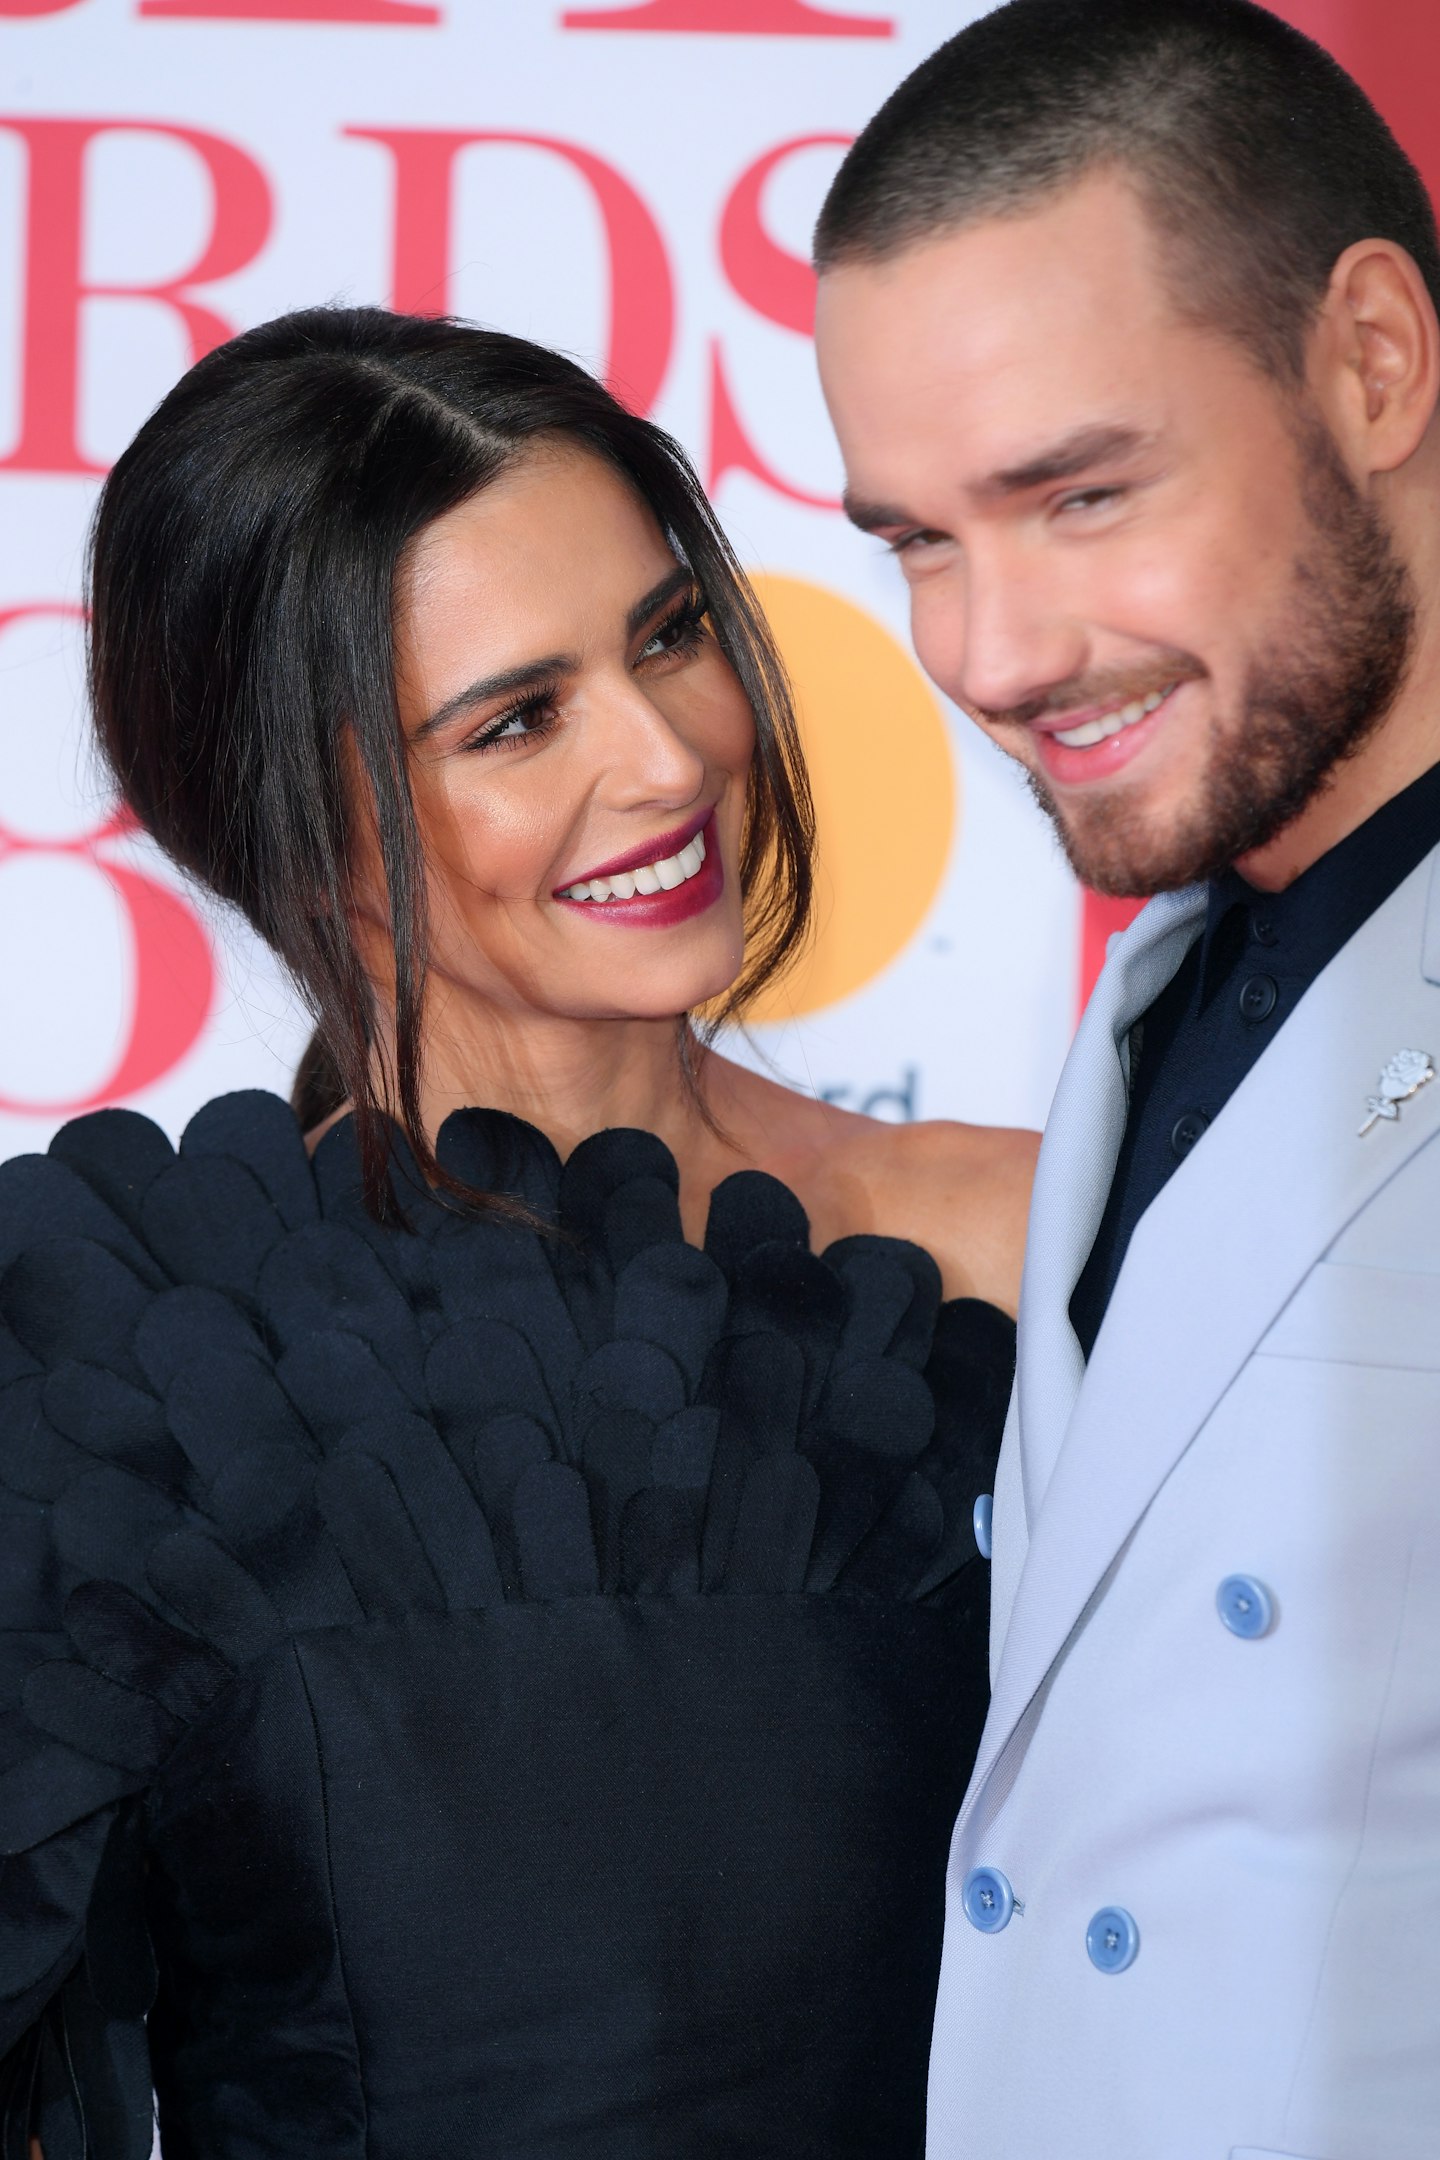 Cheryl and Liam Payne's PDA at The BRITs